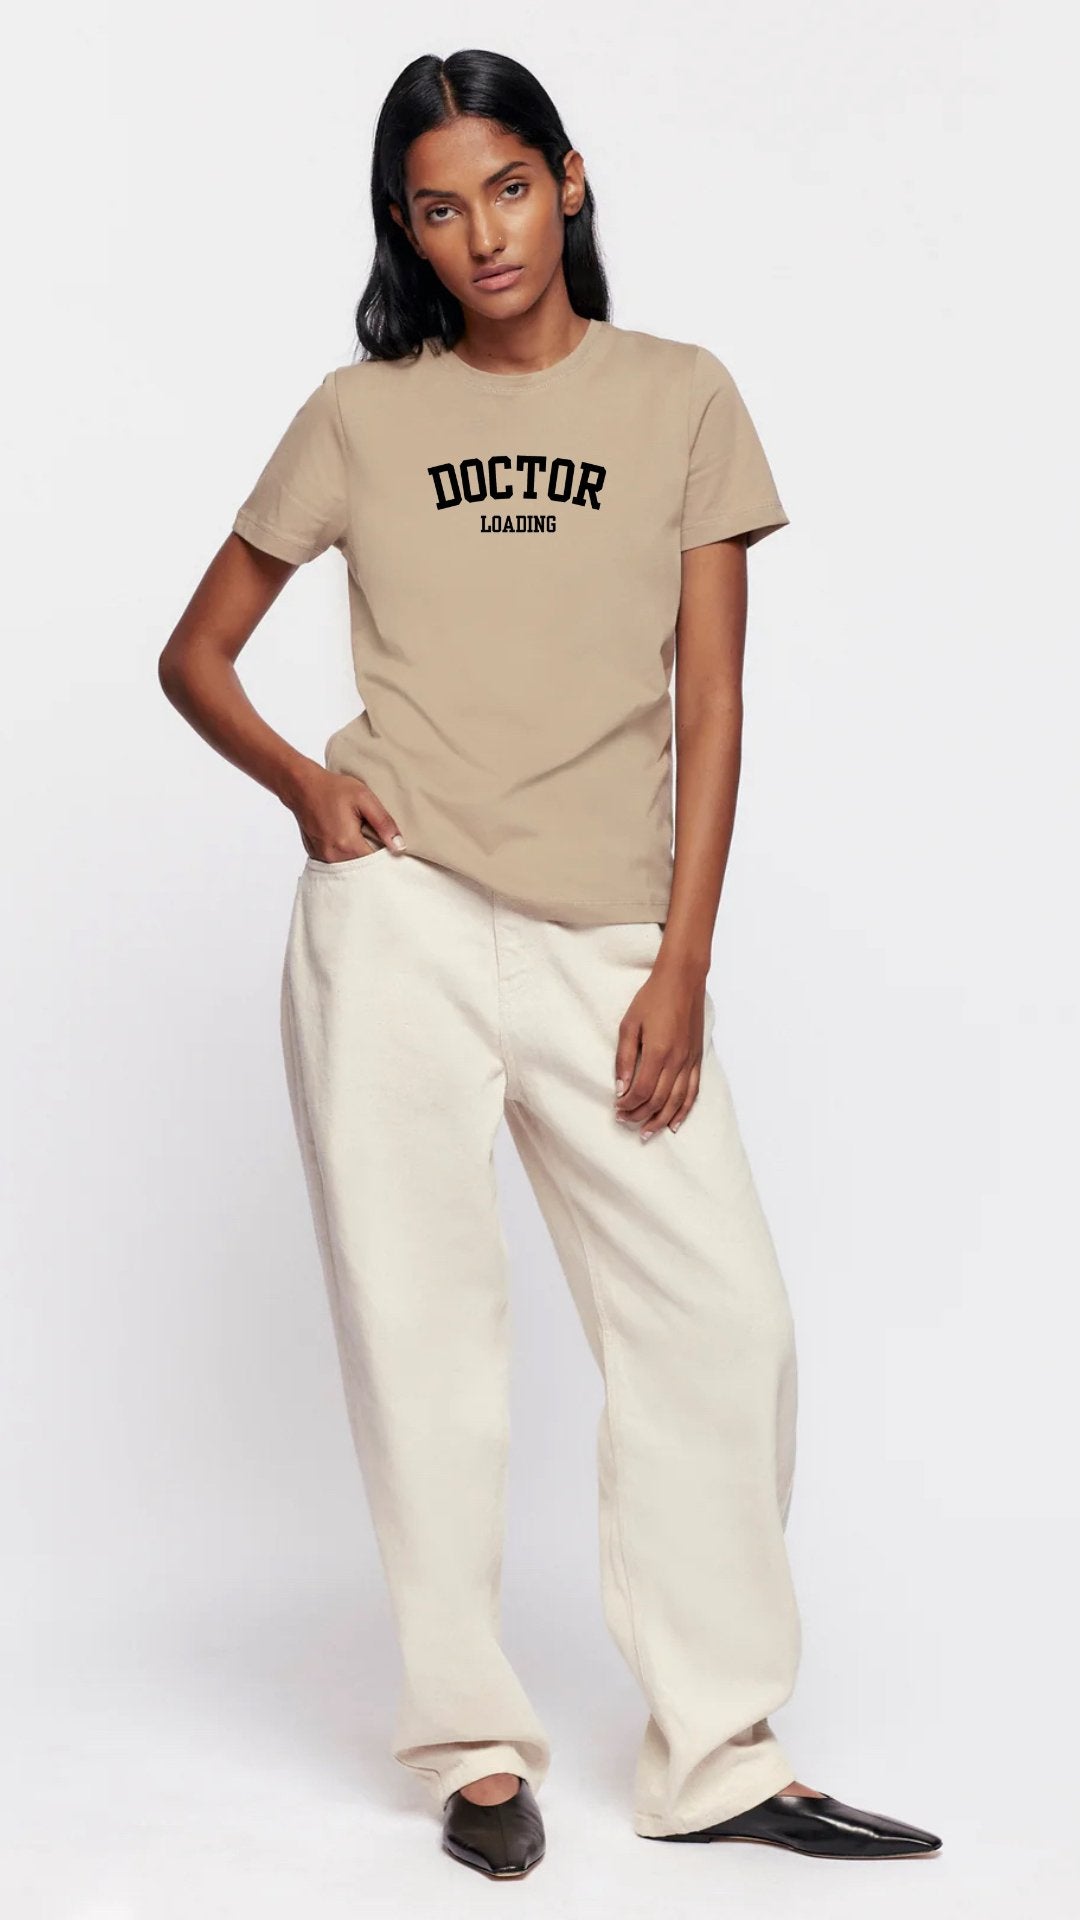 "Doctor Loading" Luxury Unisex T-shirt - The Woman Doctor